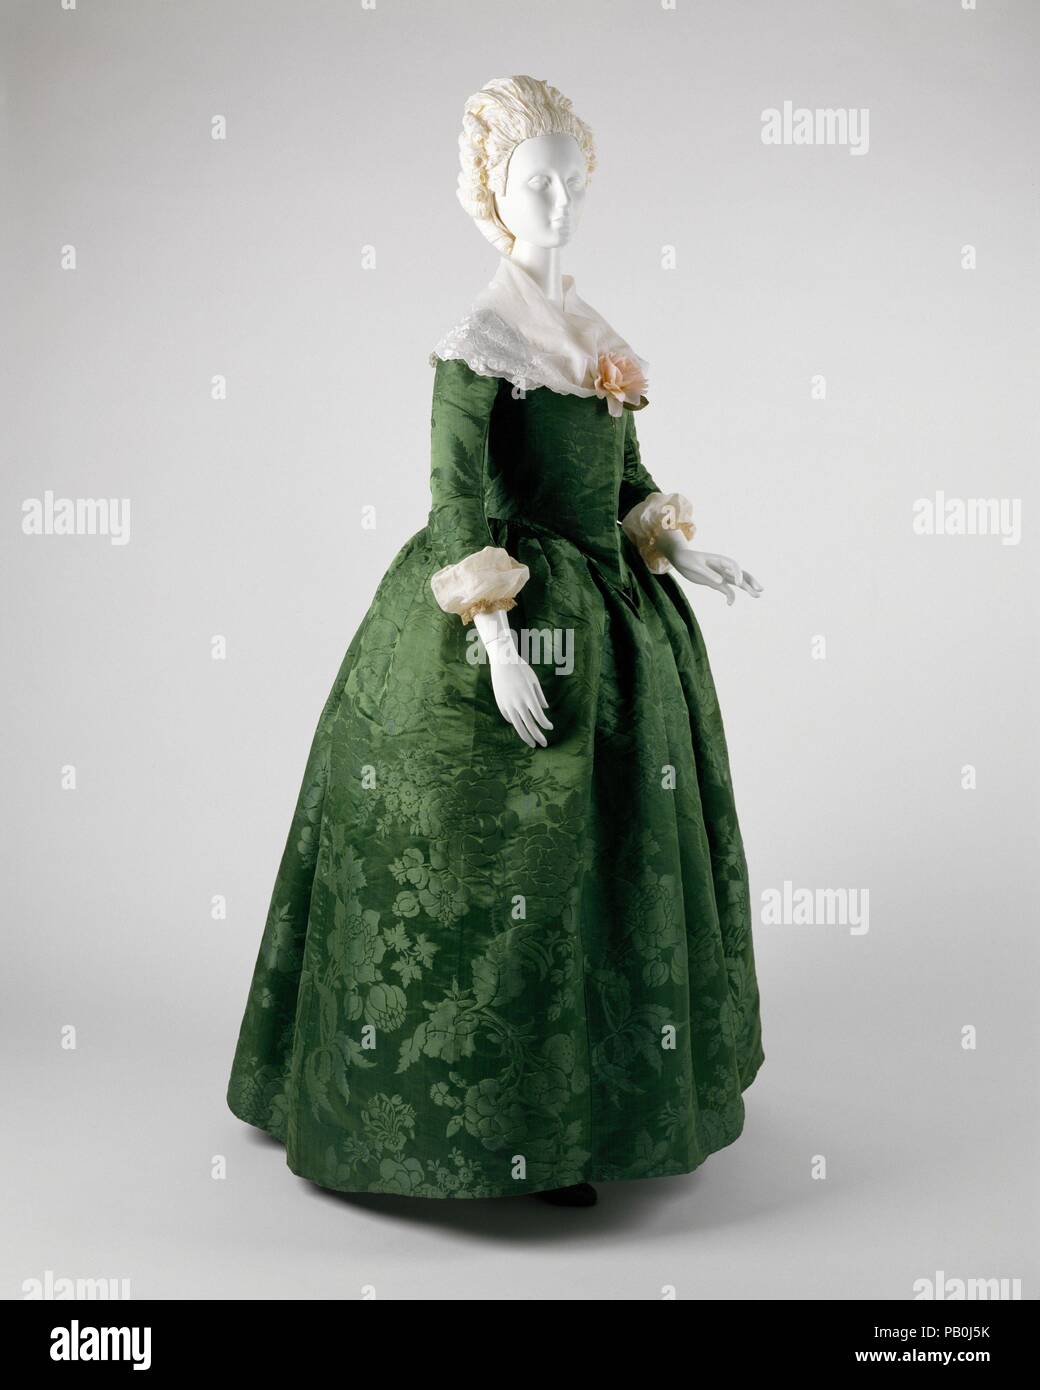 Ensemble. Culture: American. Date: ca. 1775. This dress is considerably  less gaudy than continental and English clothing of the period. Yet, it is  not lacking in sumptuousness. Rather, the green Spitalfields damask